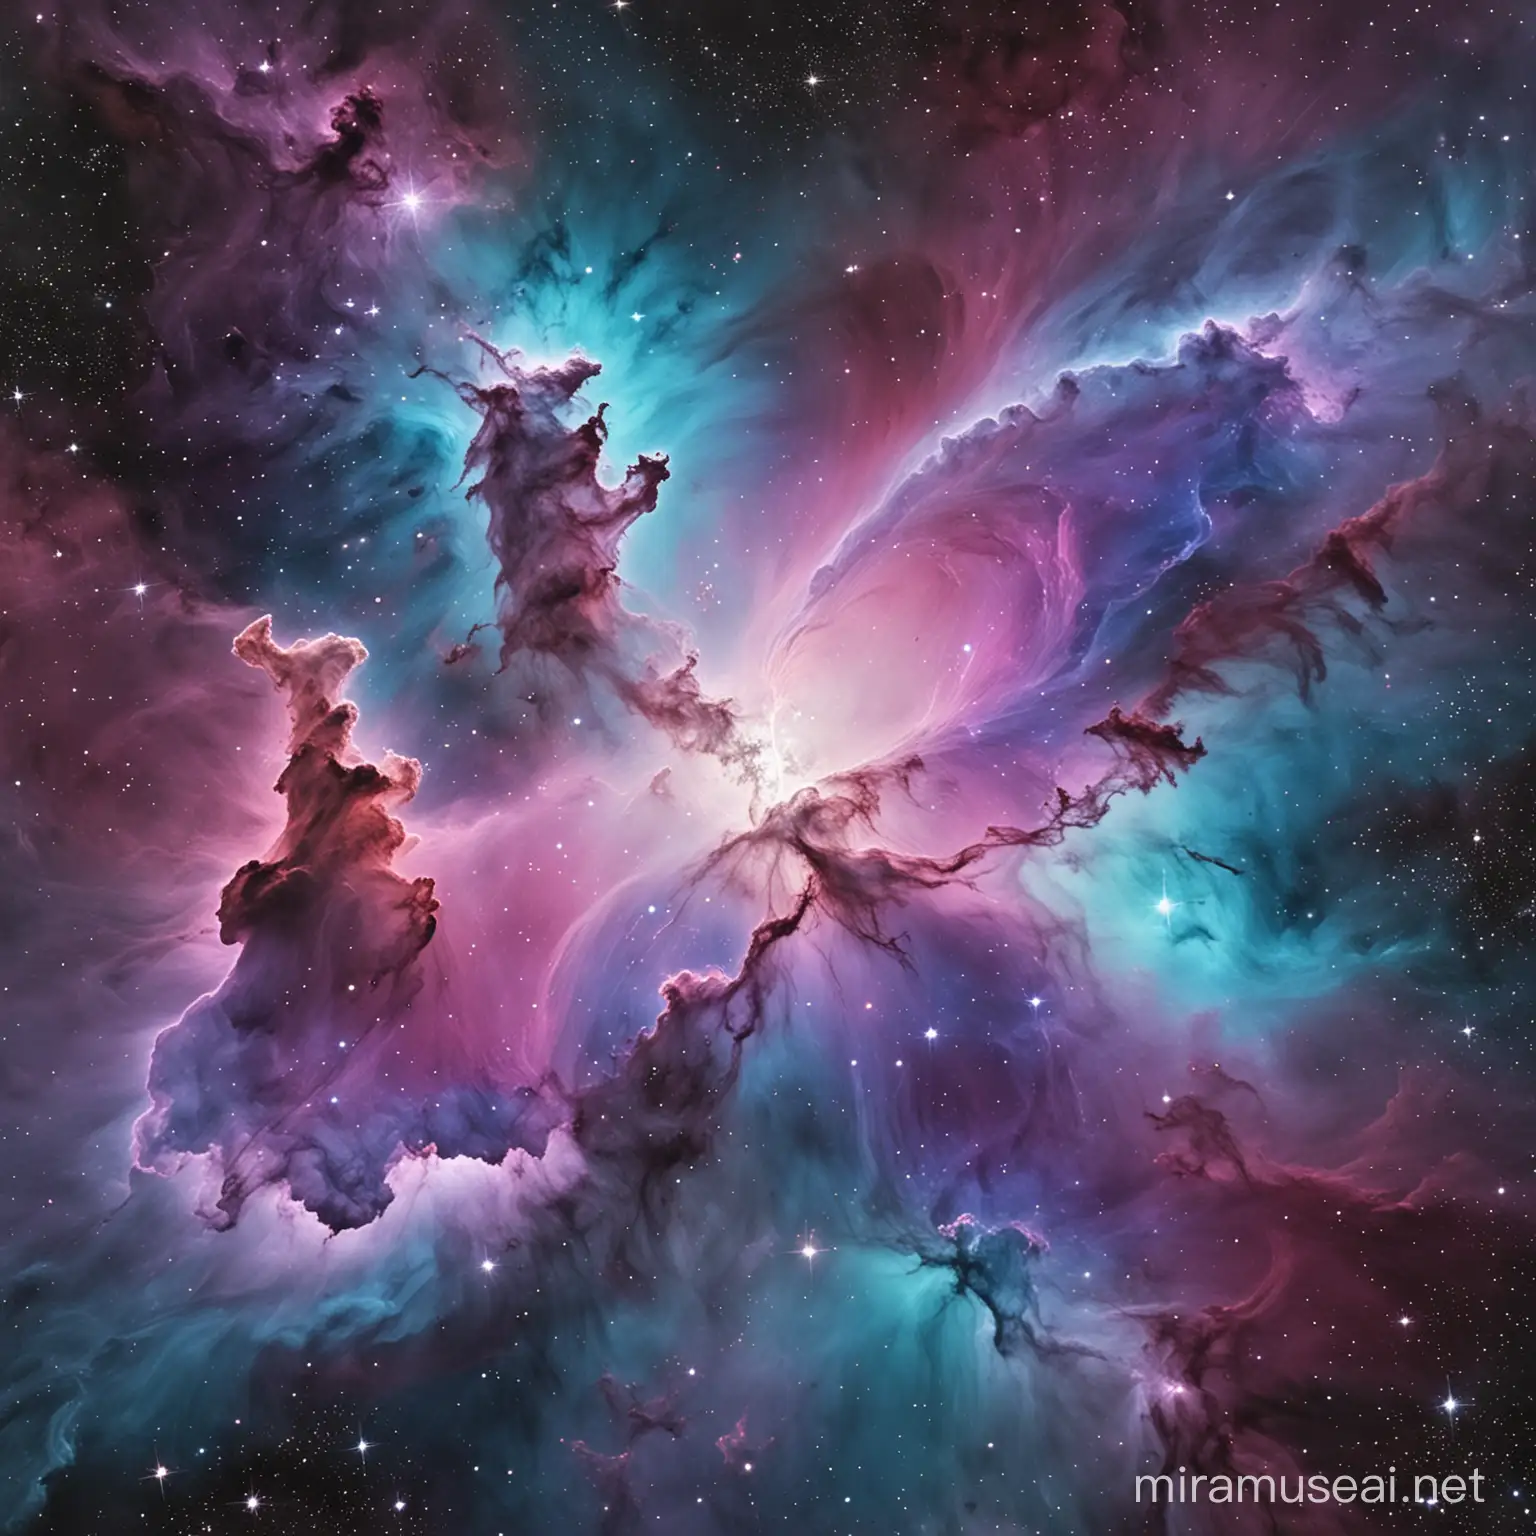 Create a nebula with primary colors purple, teal and a little bit of white and pink